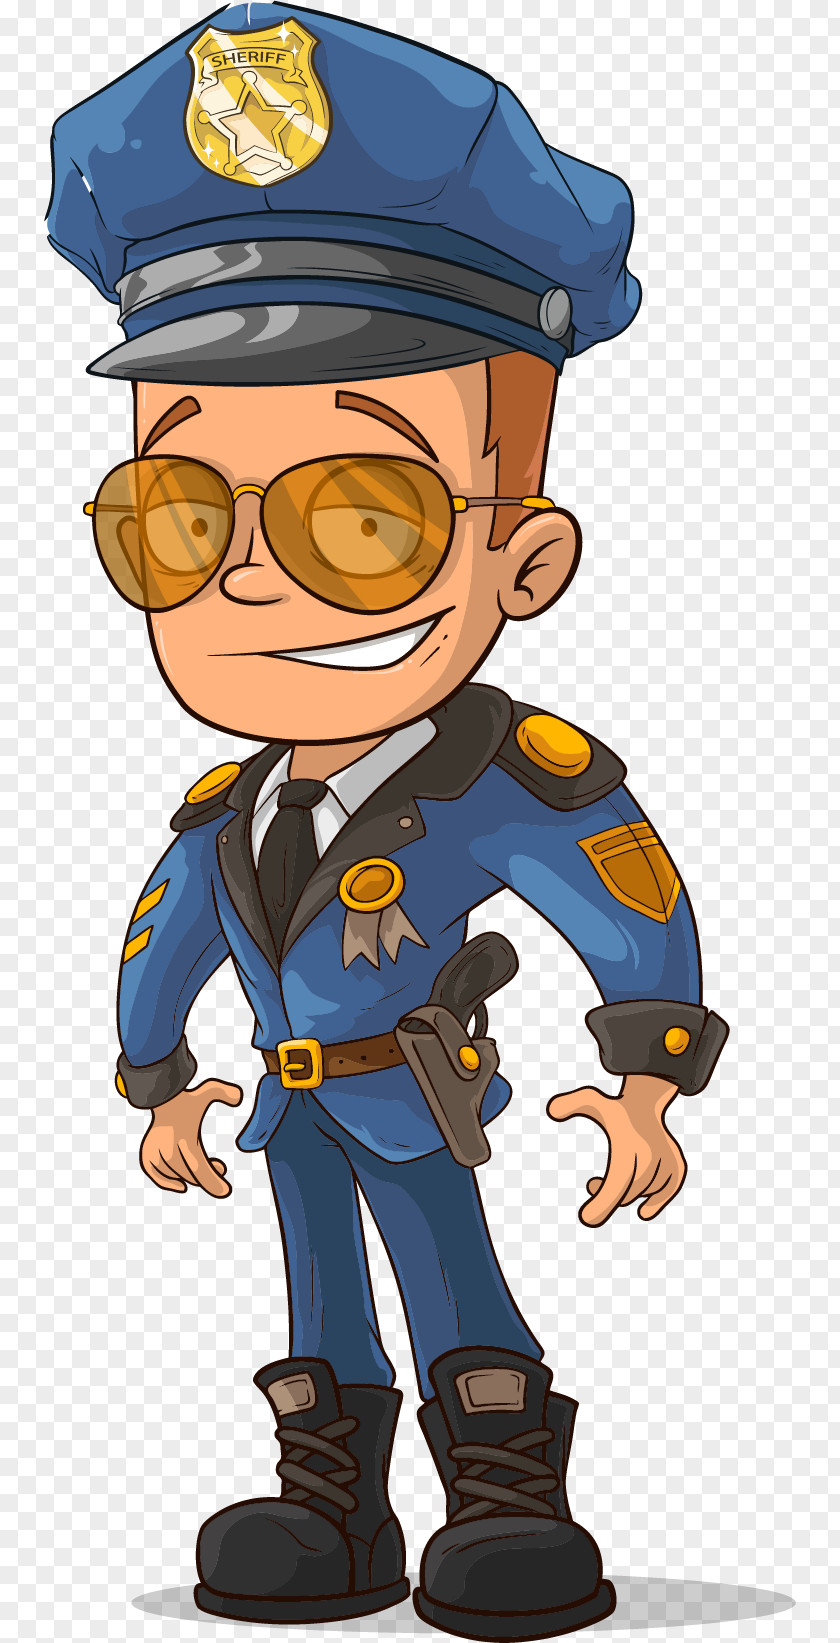 Vector Hand-painted Police Cartoon Royalty-free Stock Illustration PNG